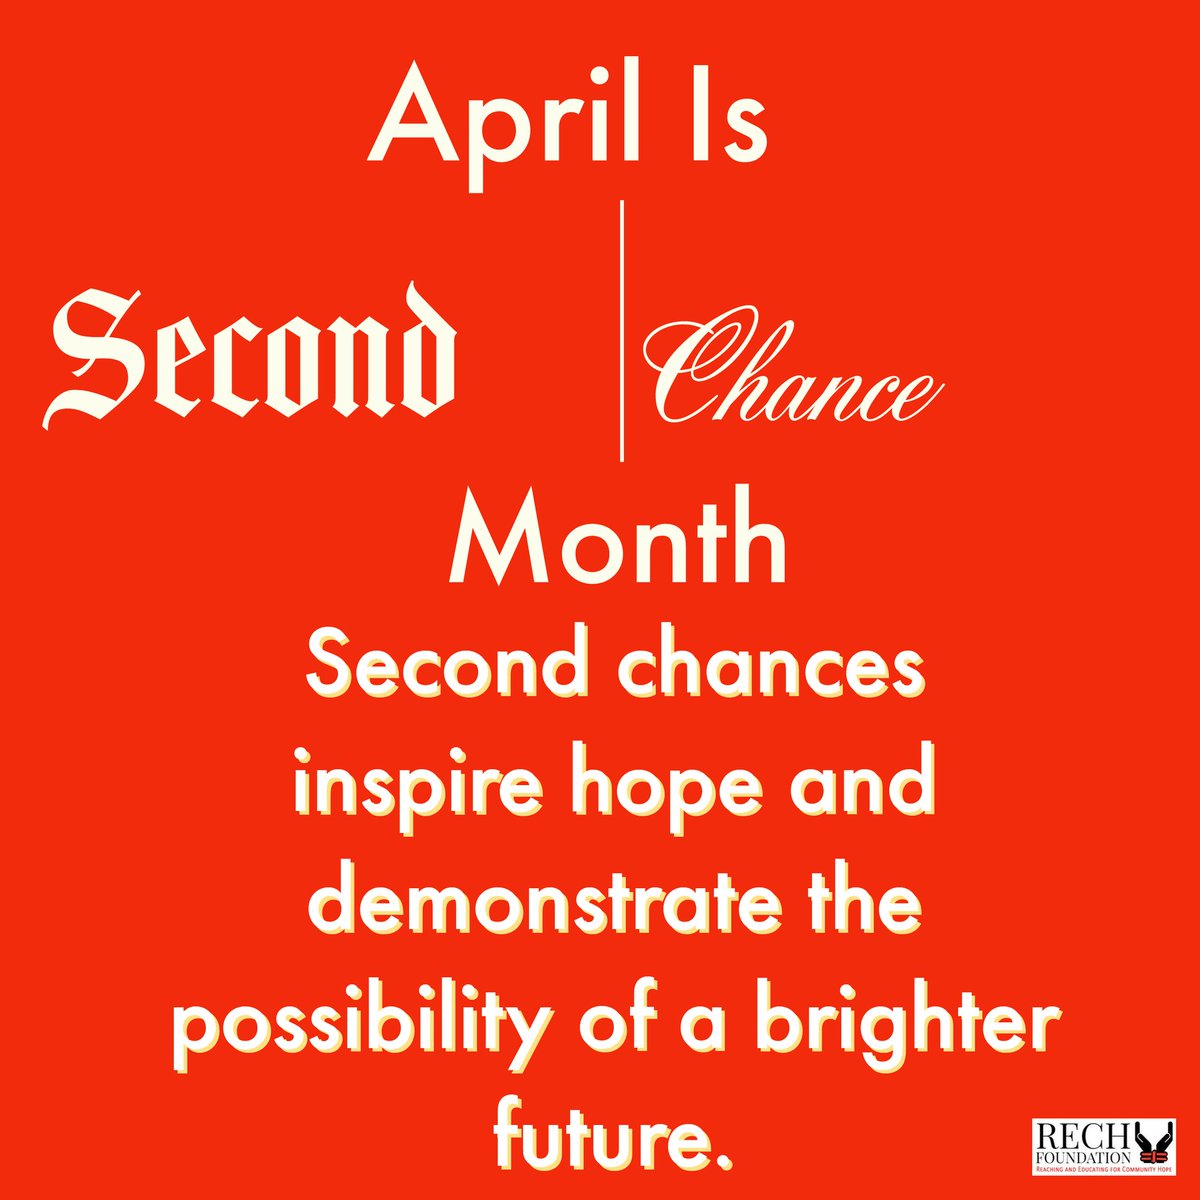 Second chances inspire hope and demonstrate the possibility of a brighter future. Give the hope of a #secondchance #SecondChanceMonth
#secondchances #rehabilitation #reintegration #reentry #hope #helpinthehouse #Solutionist #iamaningredient #JusticeGeneral